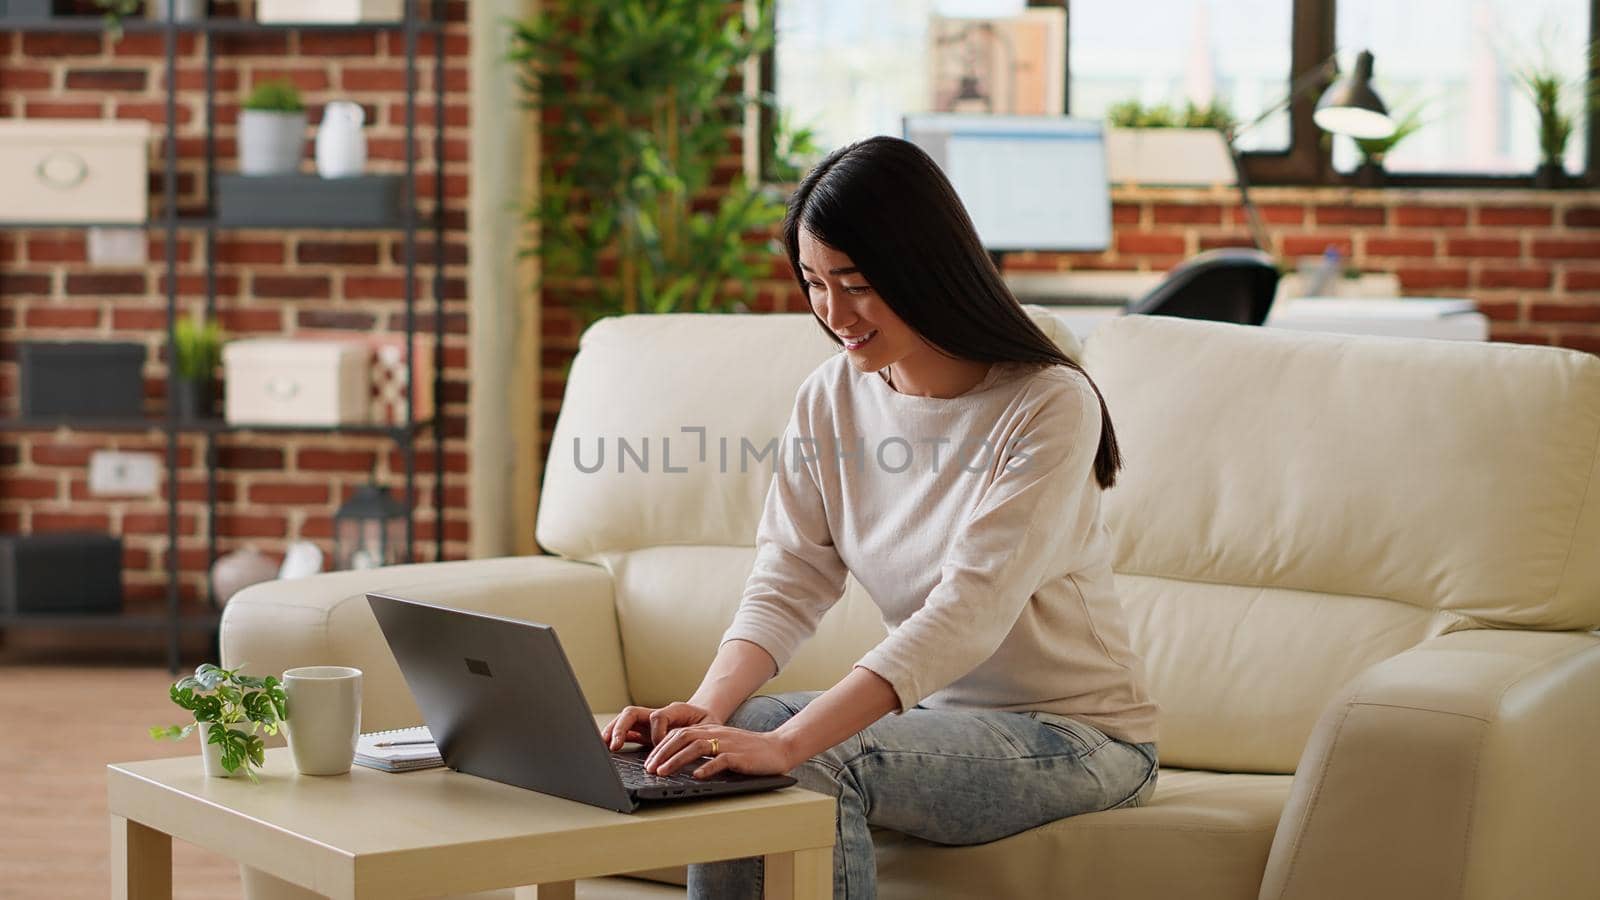 Young adult person doing remote work on modern portable computer while at home. Smiling heartily woman at home working remotely on laptop while sitting on sofa in living room.